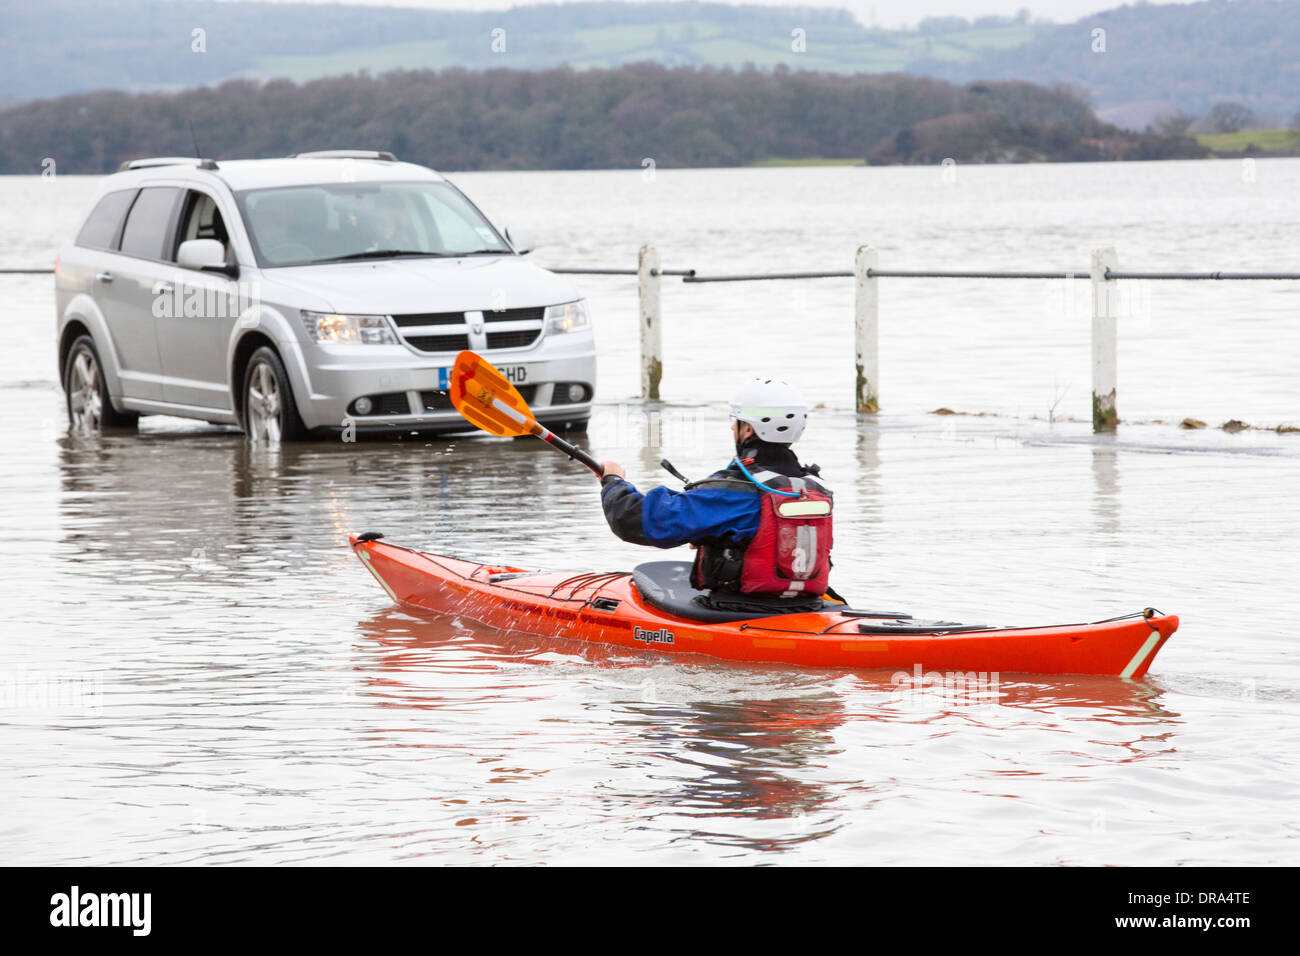 Kayakers in the flood waters on the road at Storth on the Kent Estuary in Cumbria, UK, during the January 2014 storms Stock Photo